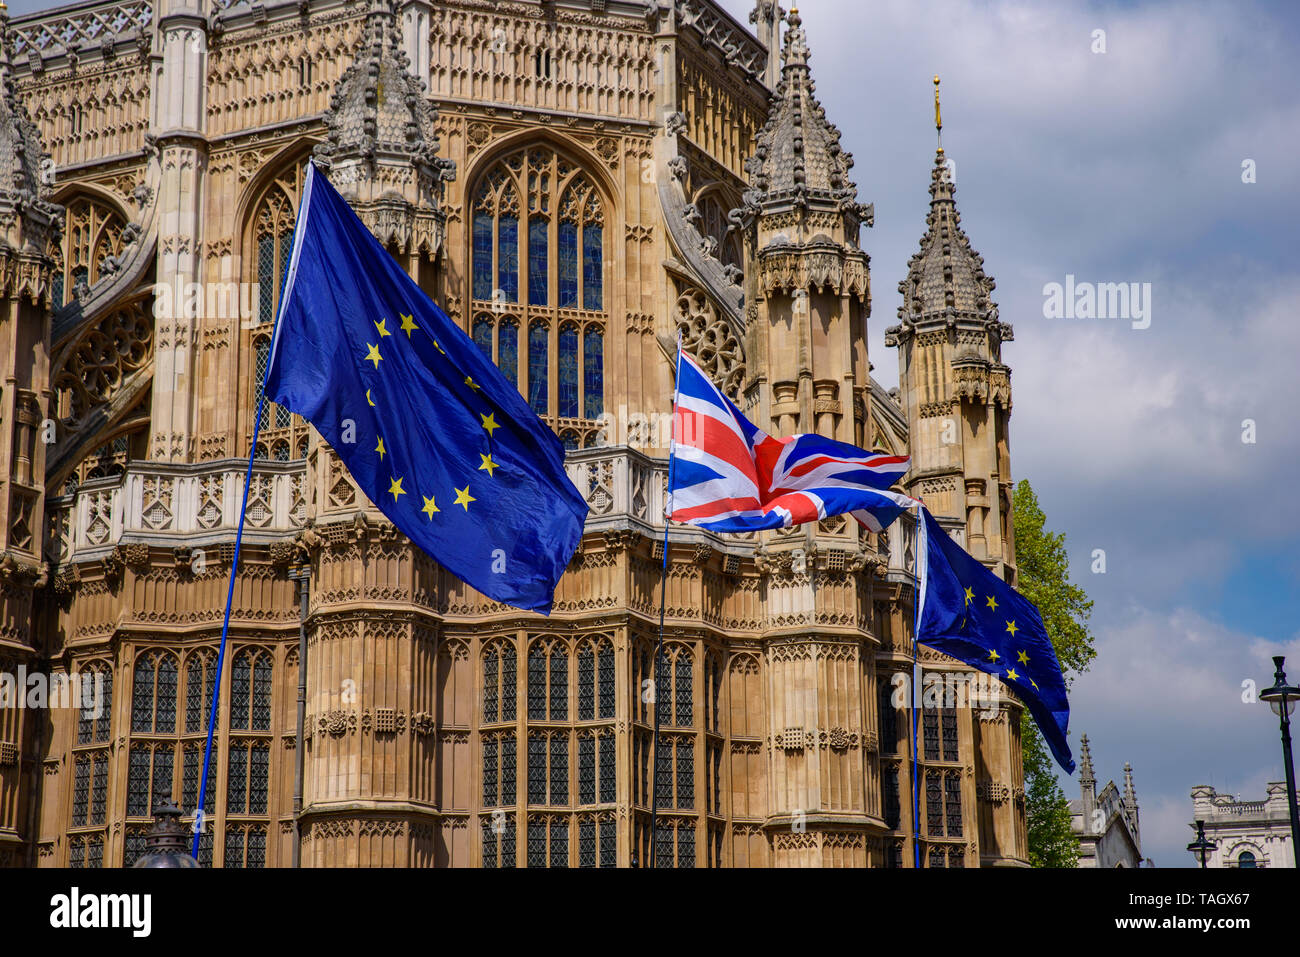 Flags of UK and the European Union in London Stock Photo